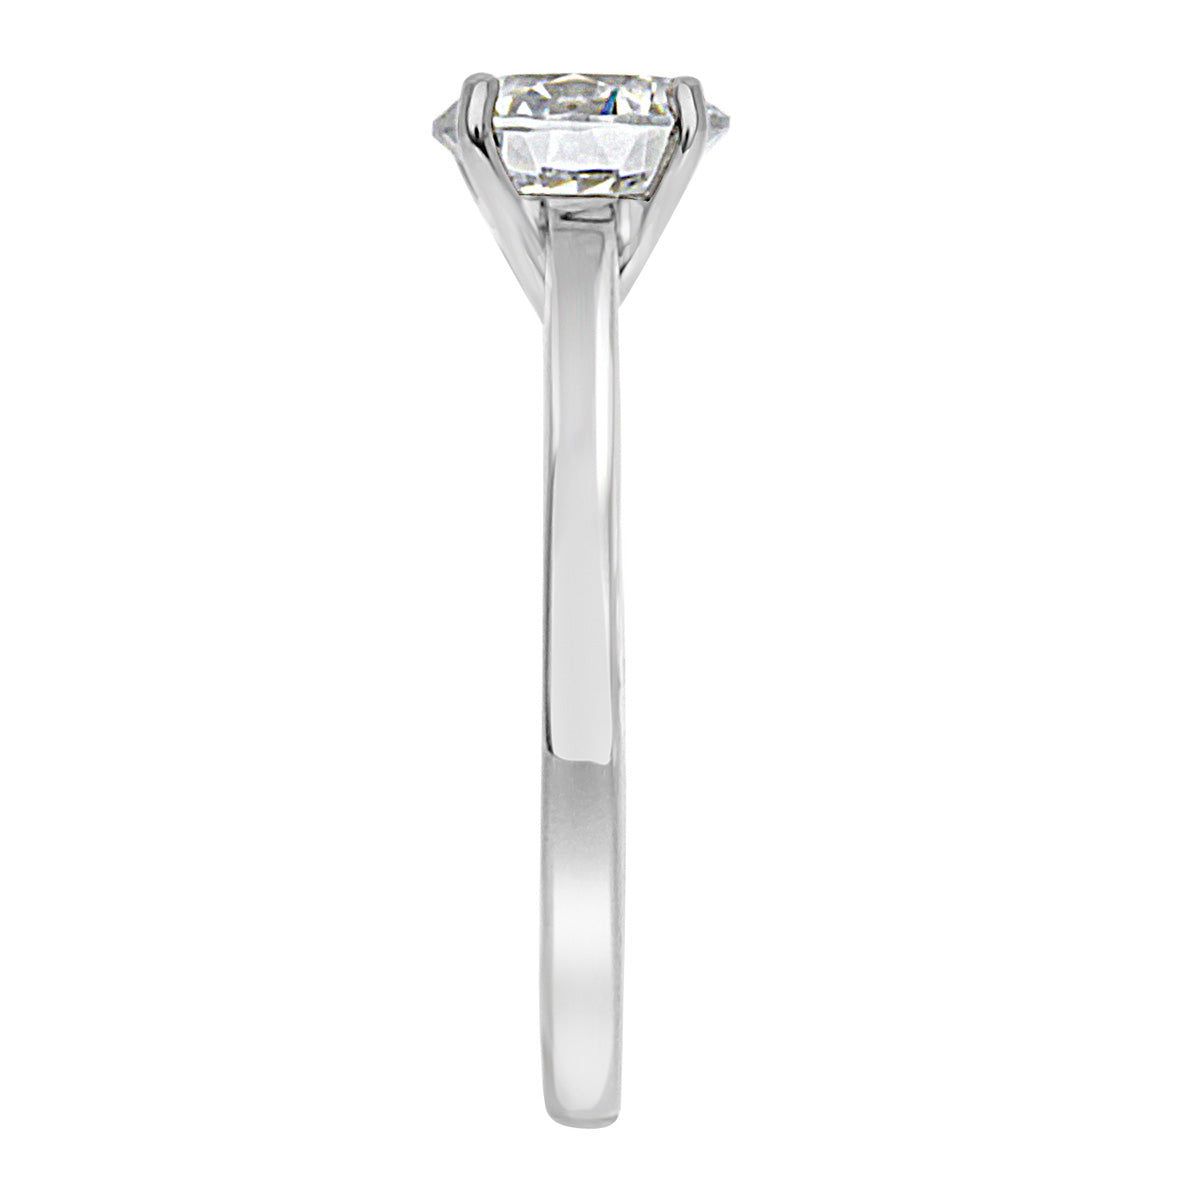 Solitaire Engagement Ring in platinum pictured upright from the side